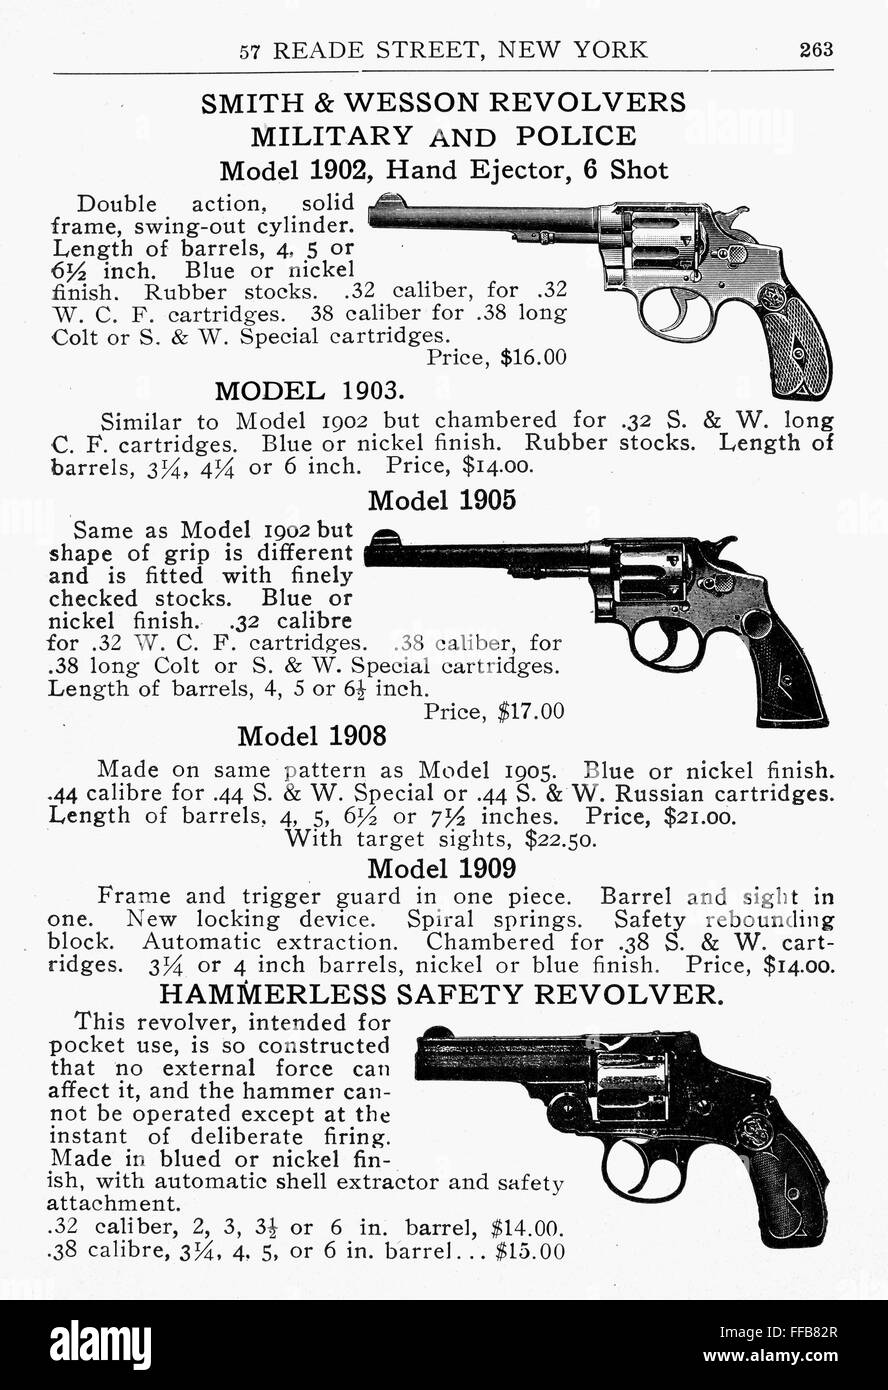 SMITH & WESSON REVOLVERS. /nPage from an Abercrombie and Fitch catalog advertising Smith & Wesson revolvers, early 20th century. Stock Photo